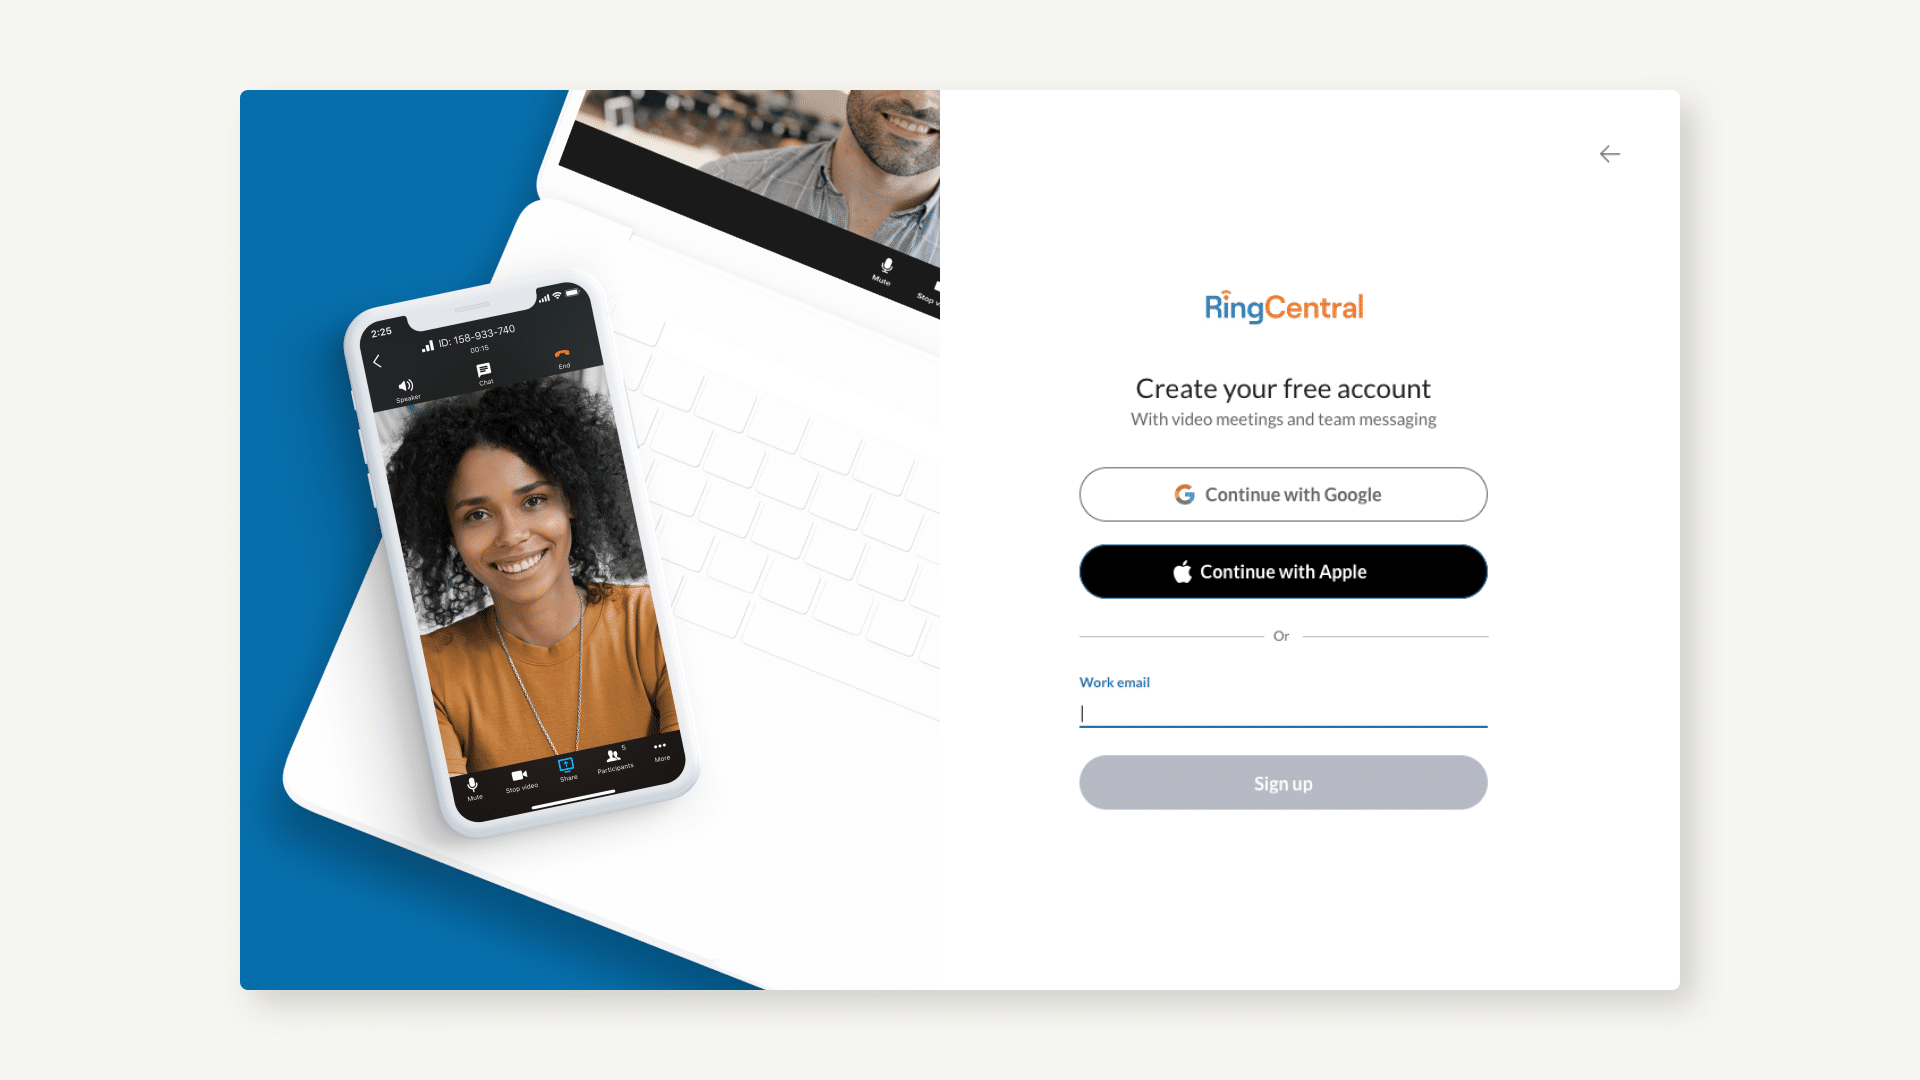 RingCentral login page using Apple ID